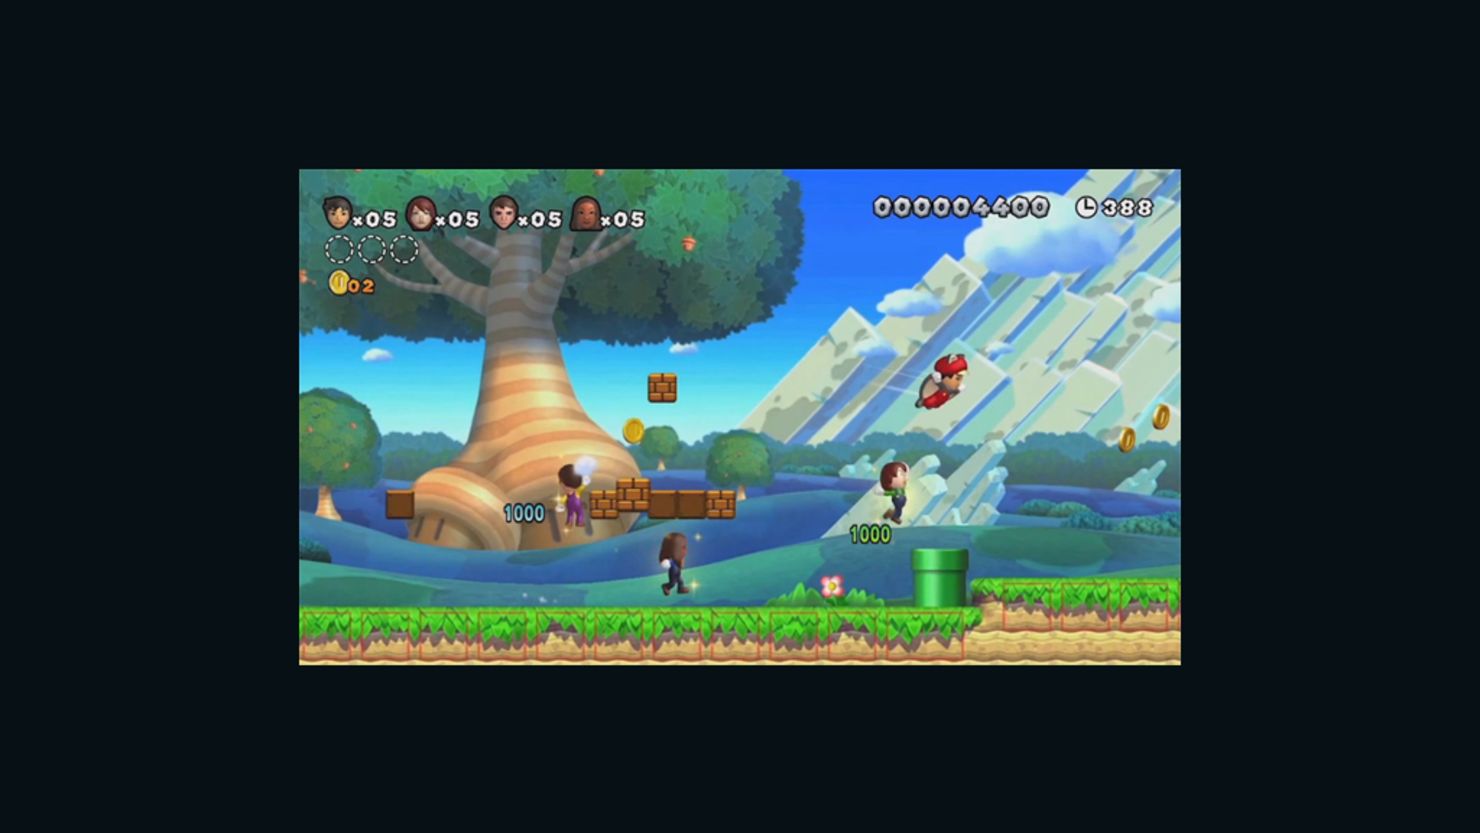 "New Super Mario Bros. U" is a popular game for Nintendo's new Wii U console.